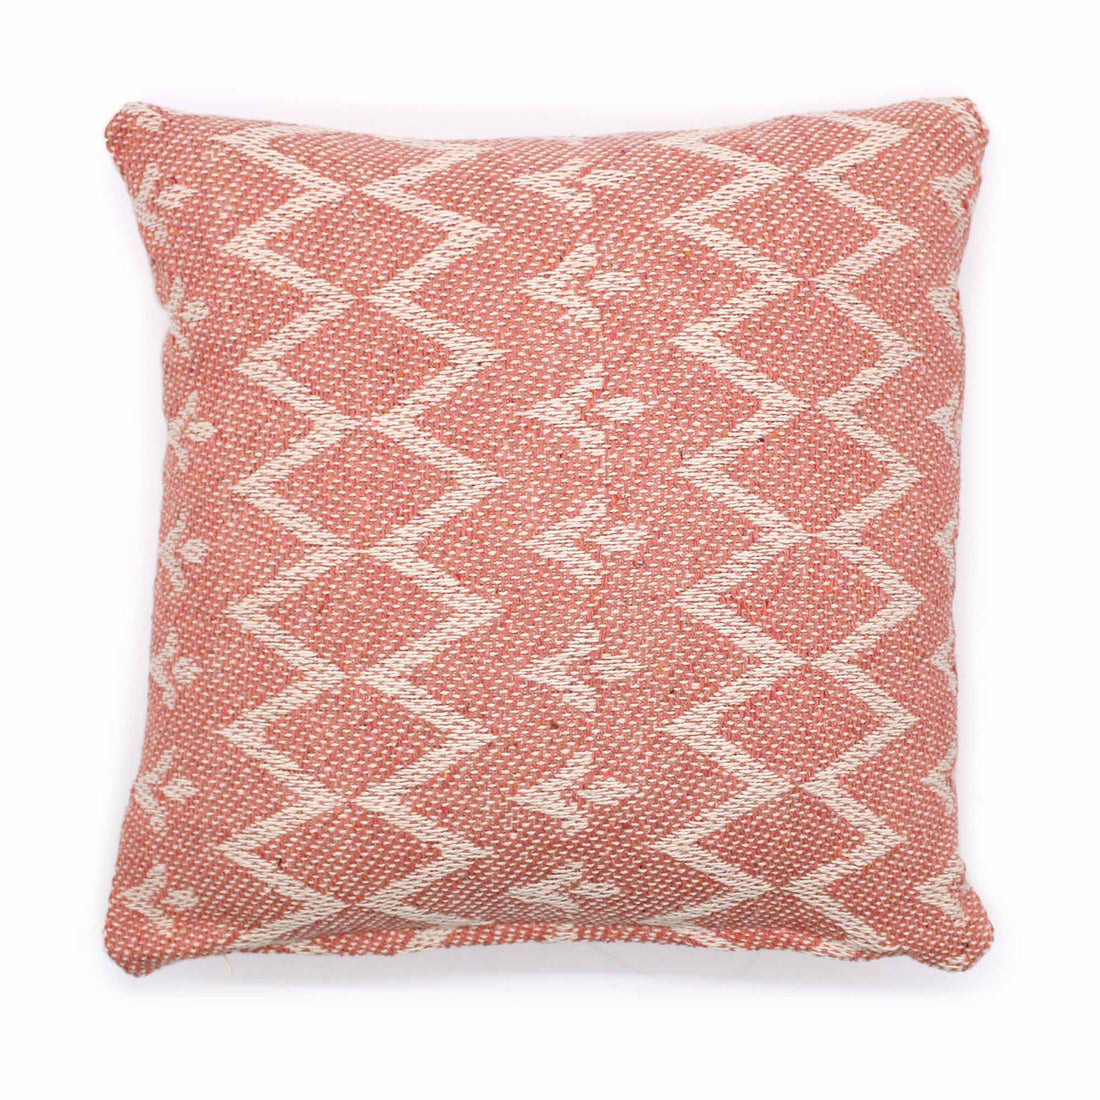 Classic Cushion Cover - Jaggered Pink - 40x40cm - best price from Maltashopper.com CICC-04